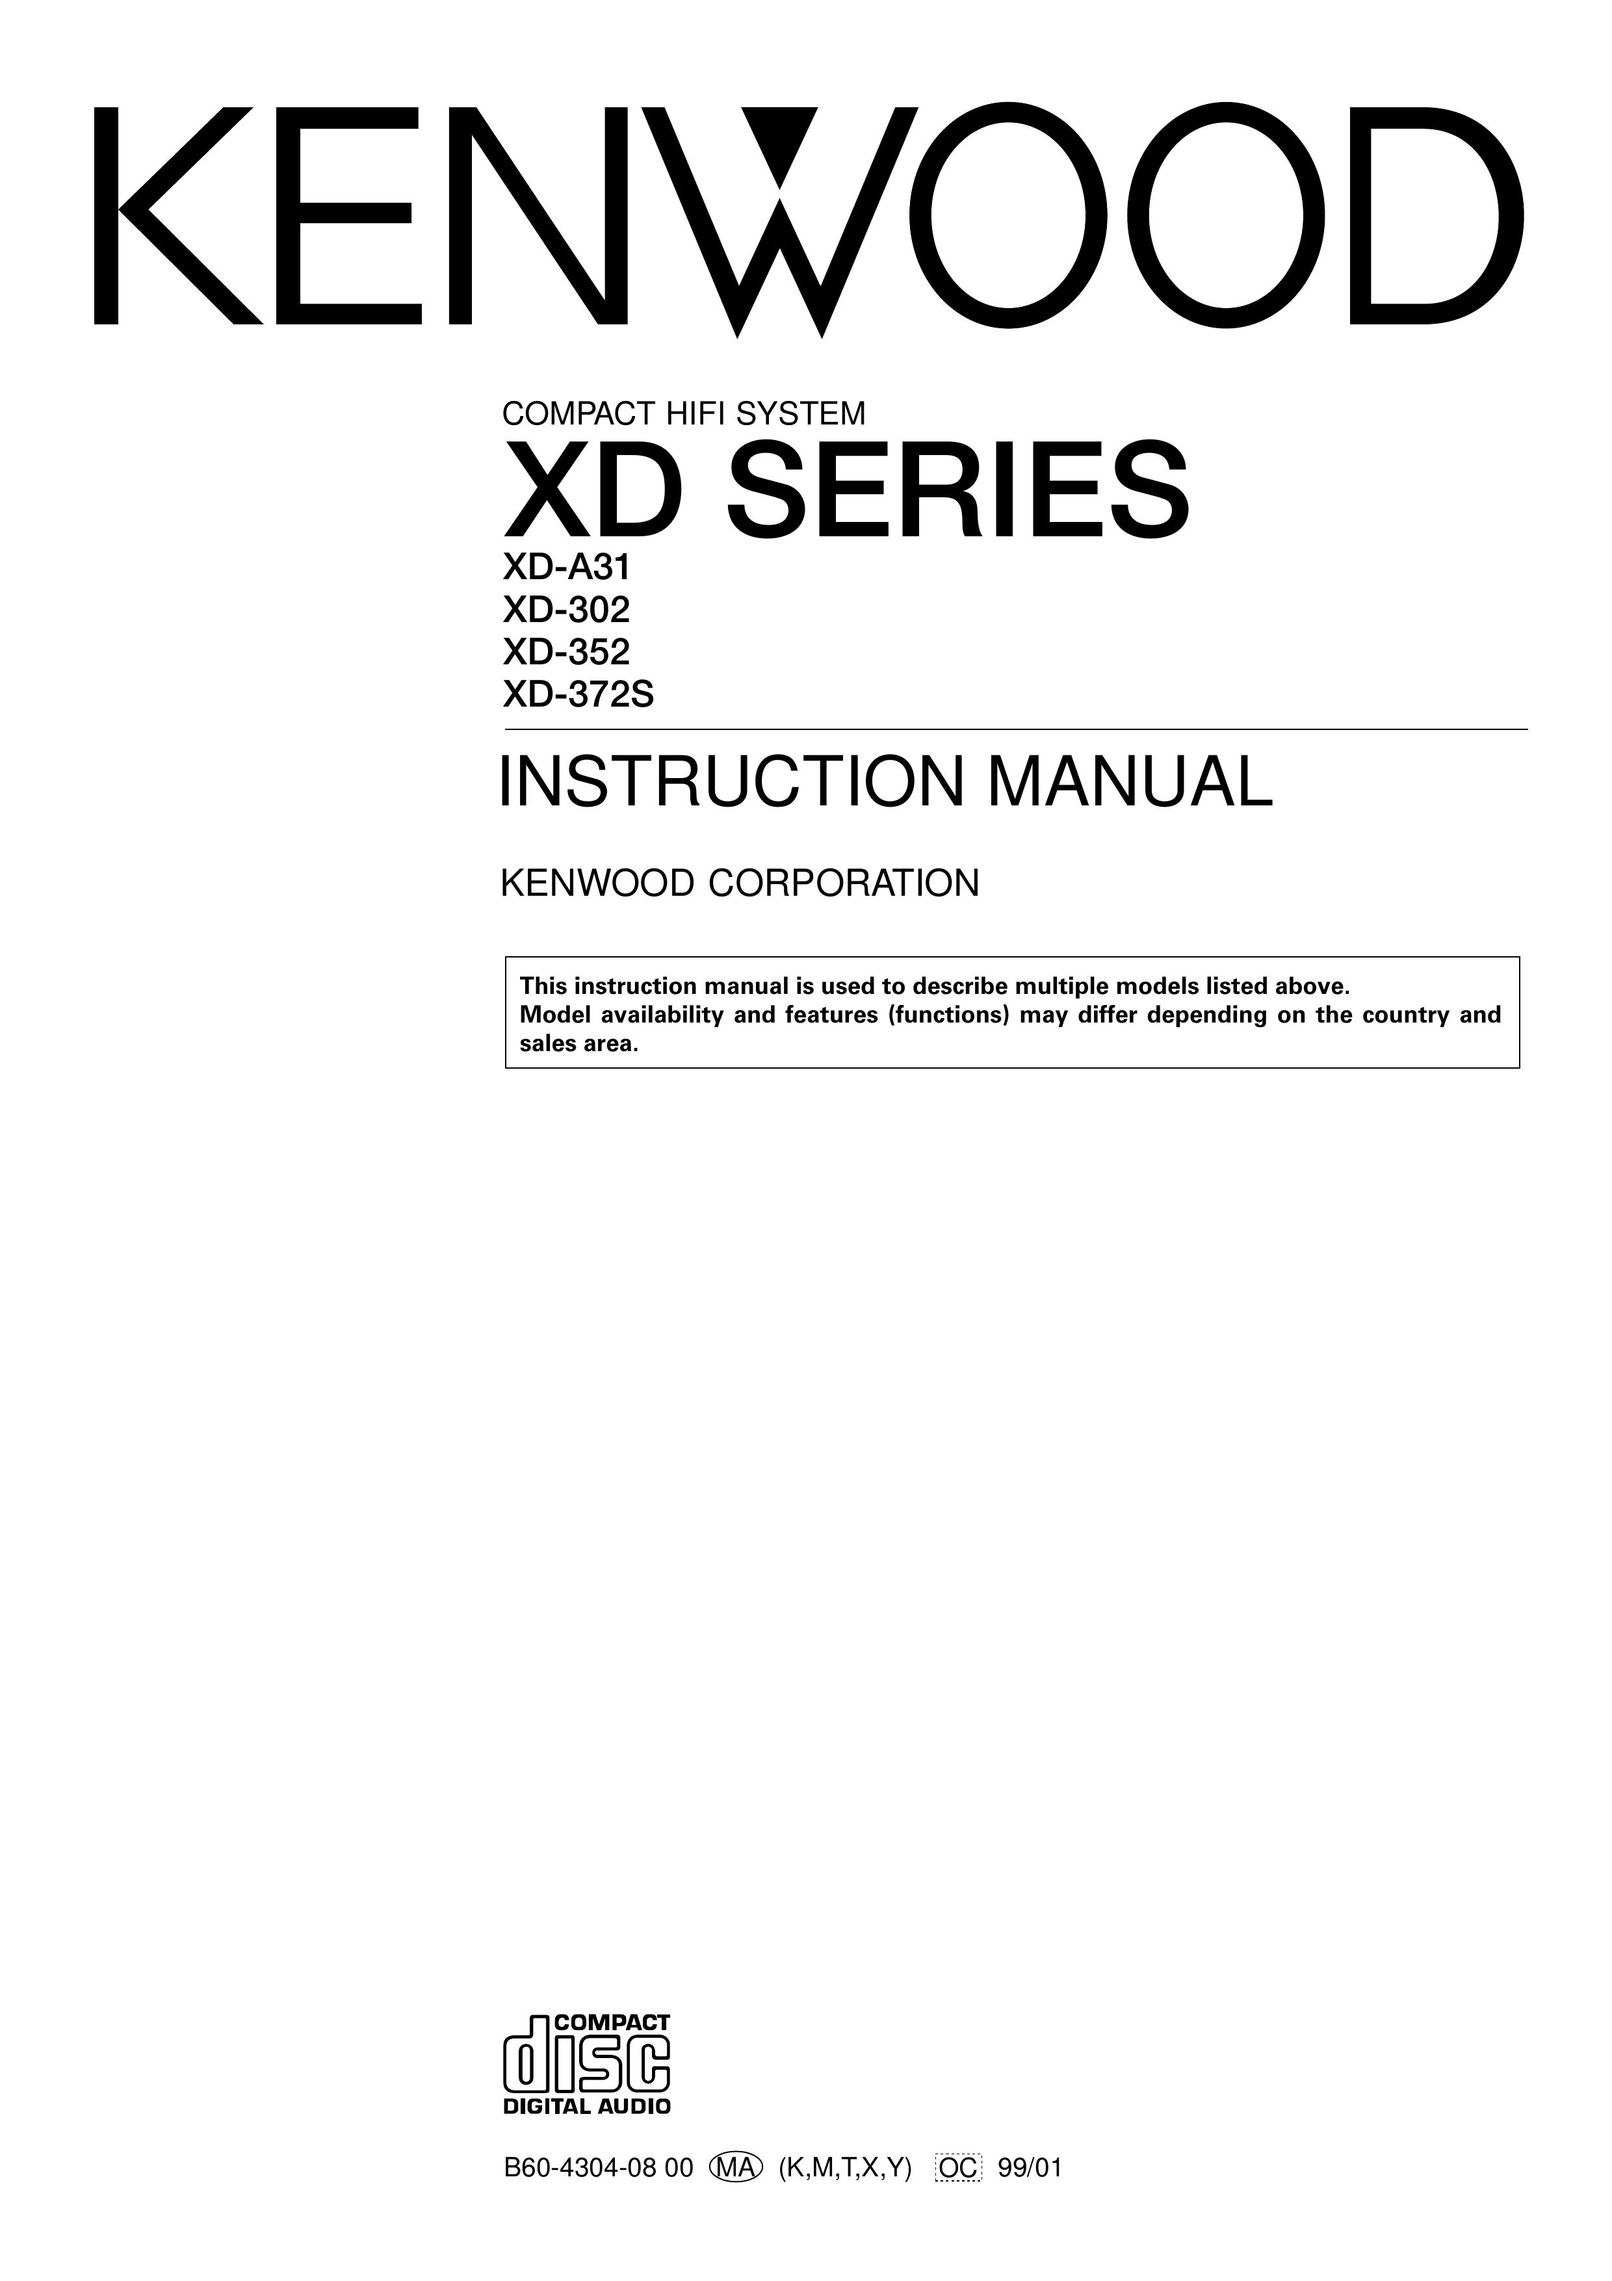 Kenwood DPX-302 Stereo System User Manual